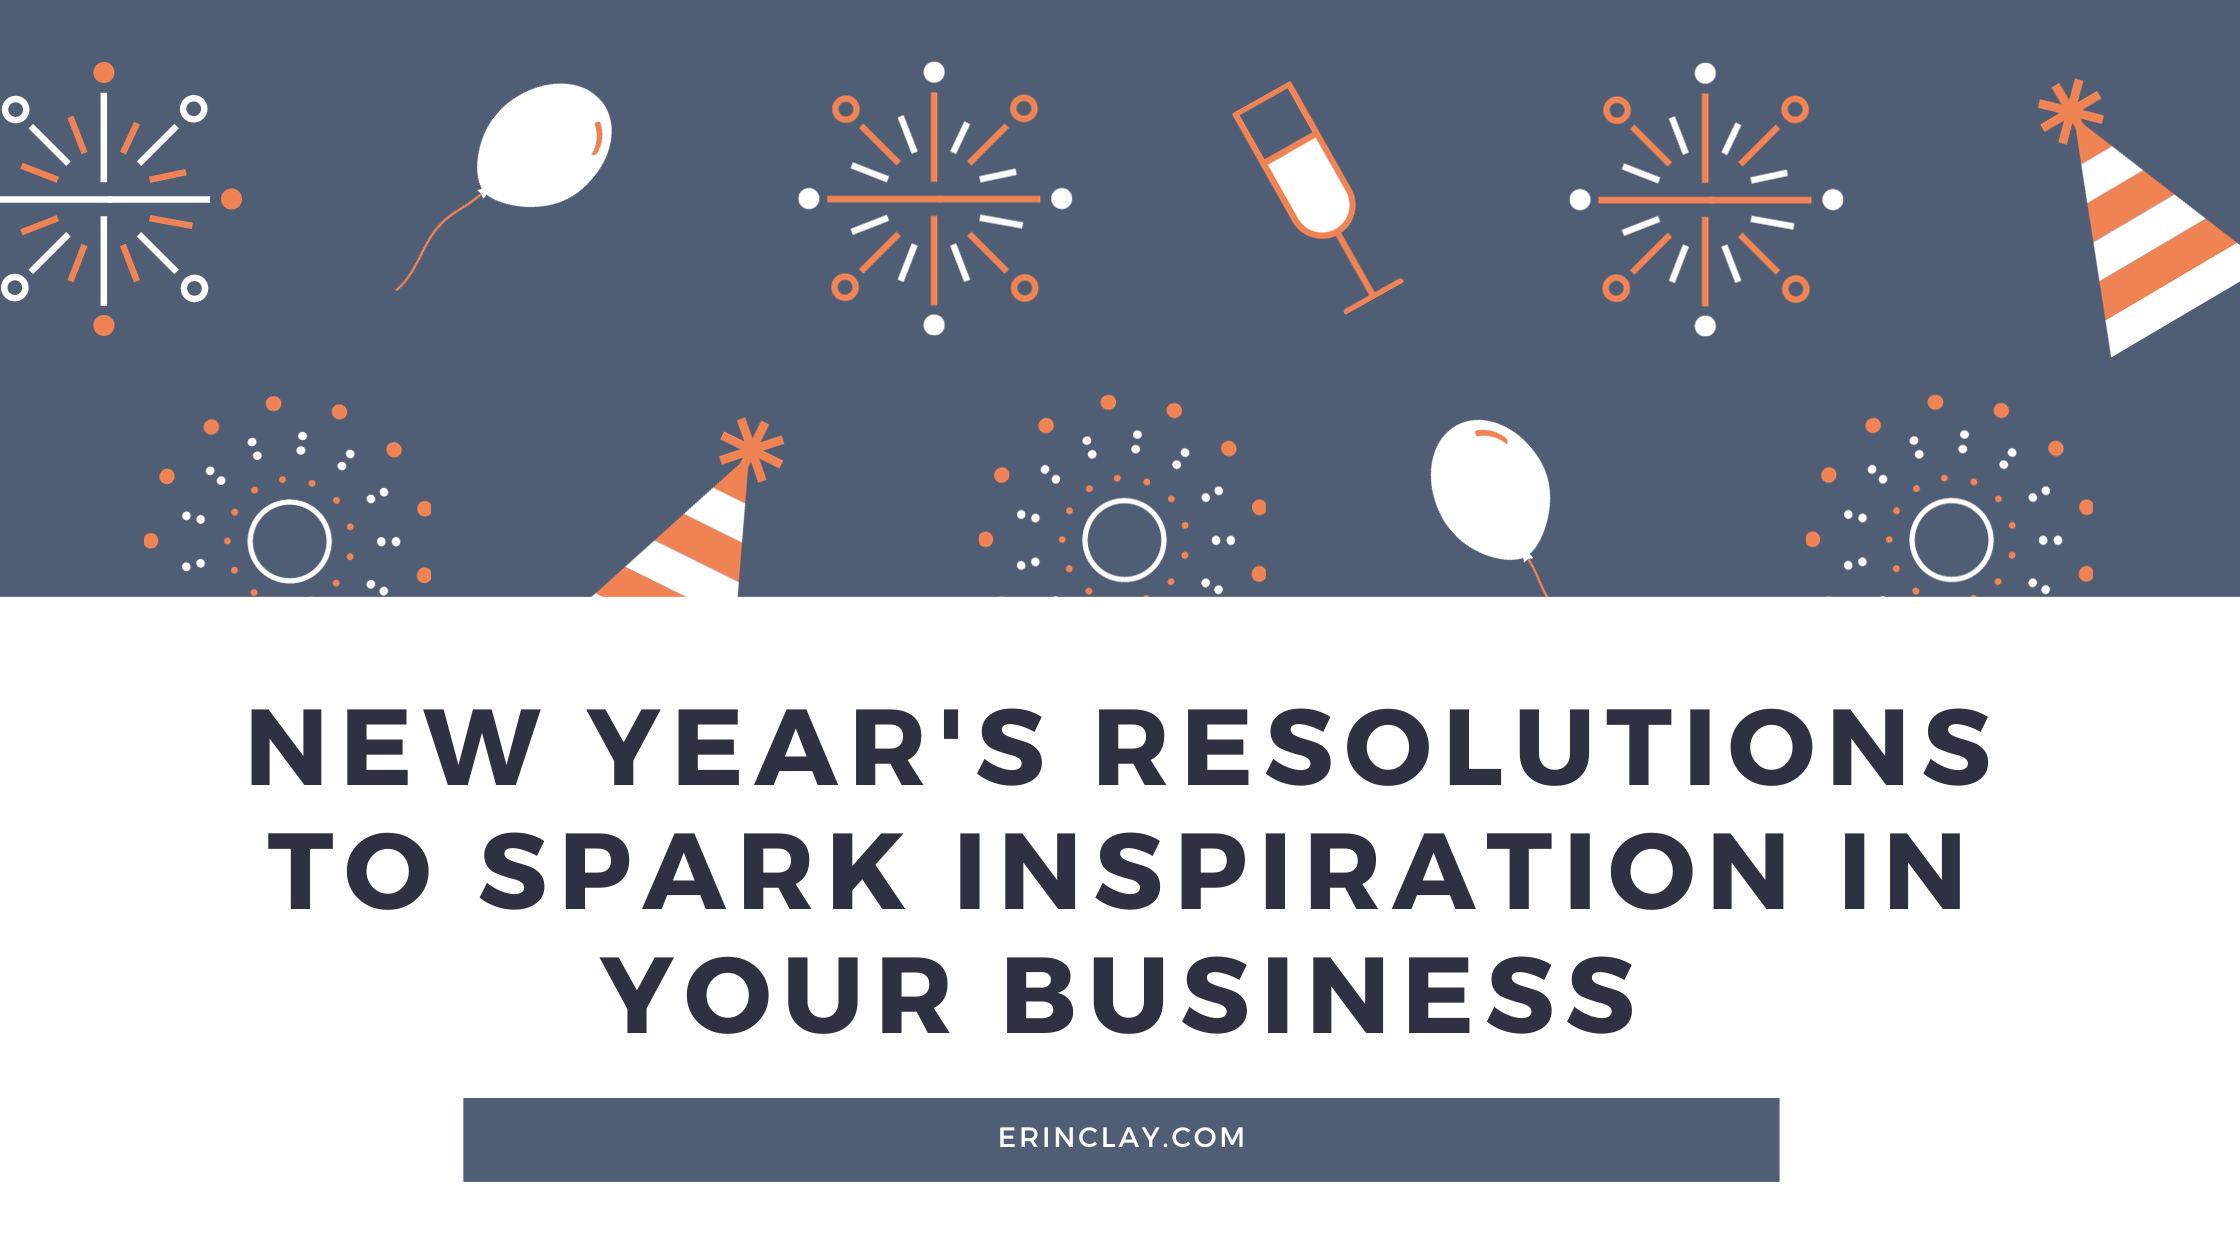 New Year's Resolutions to Spark Inspiration in Your Business